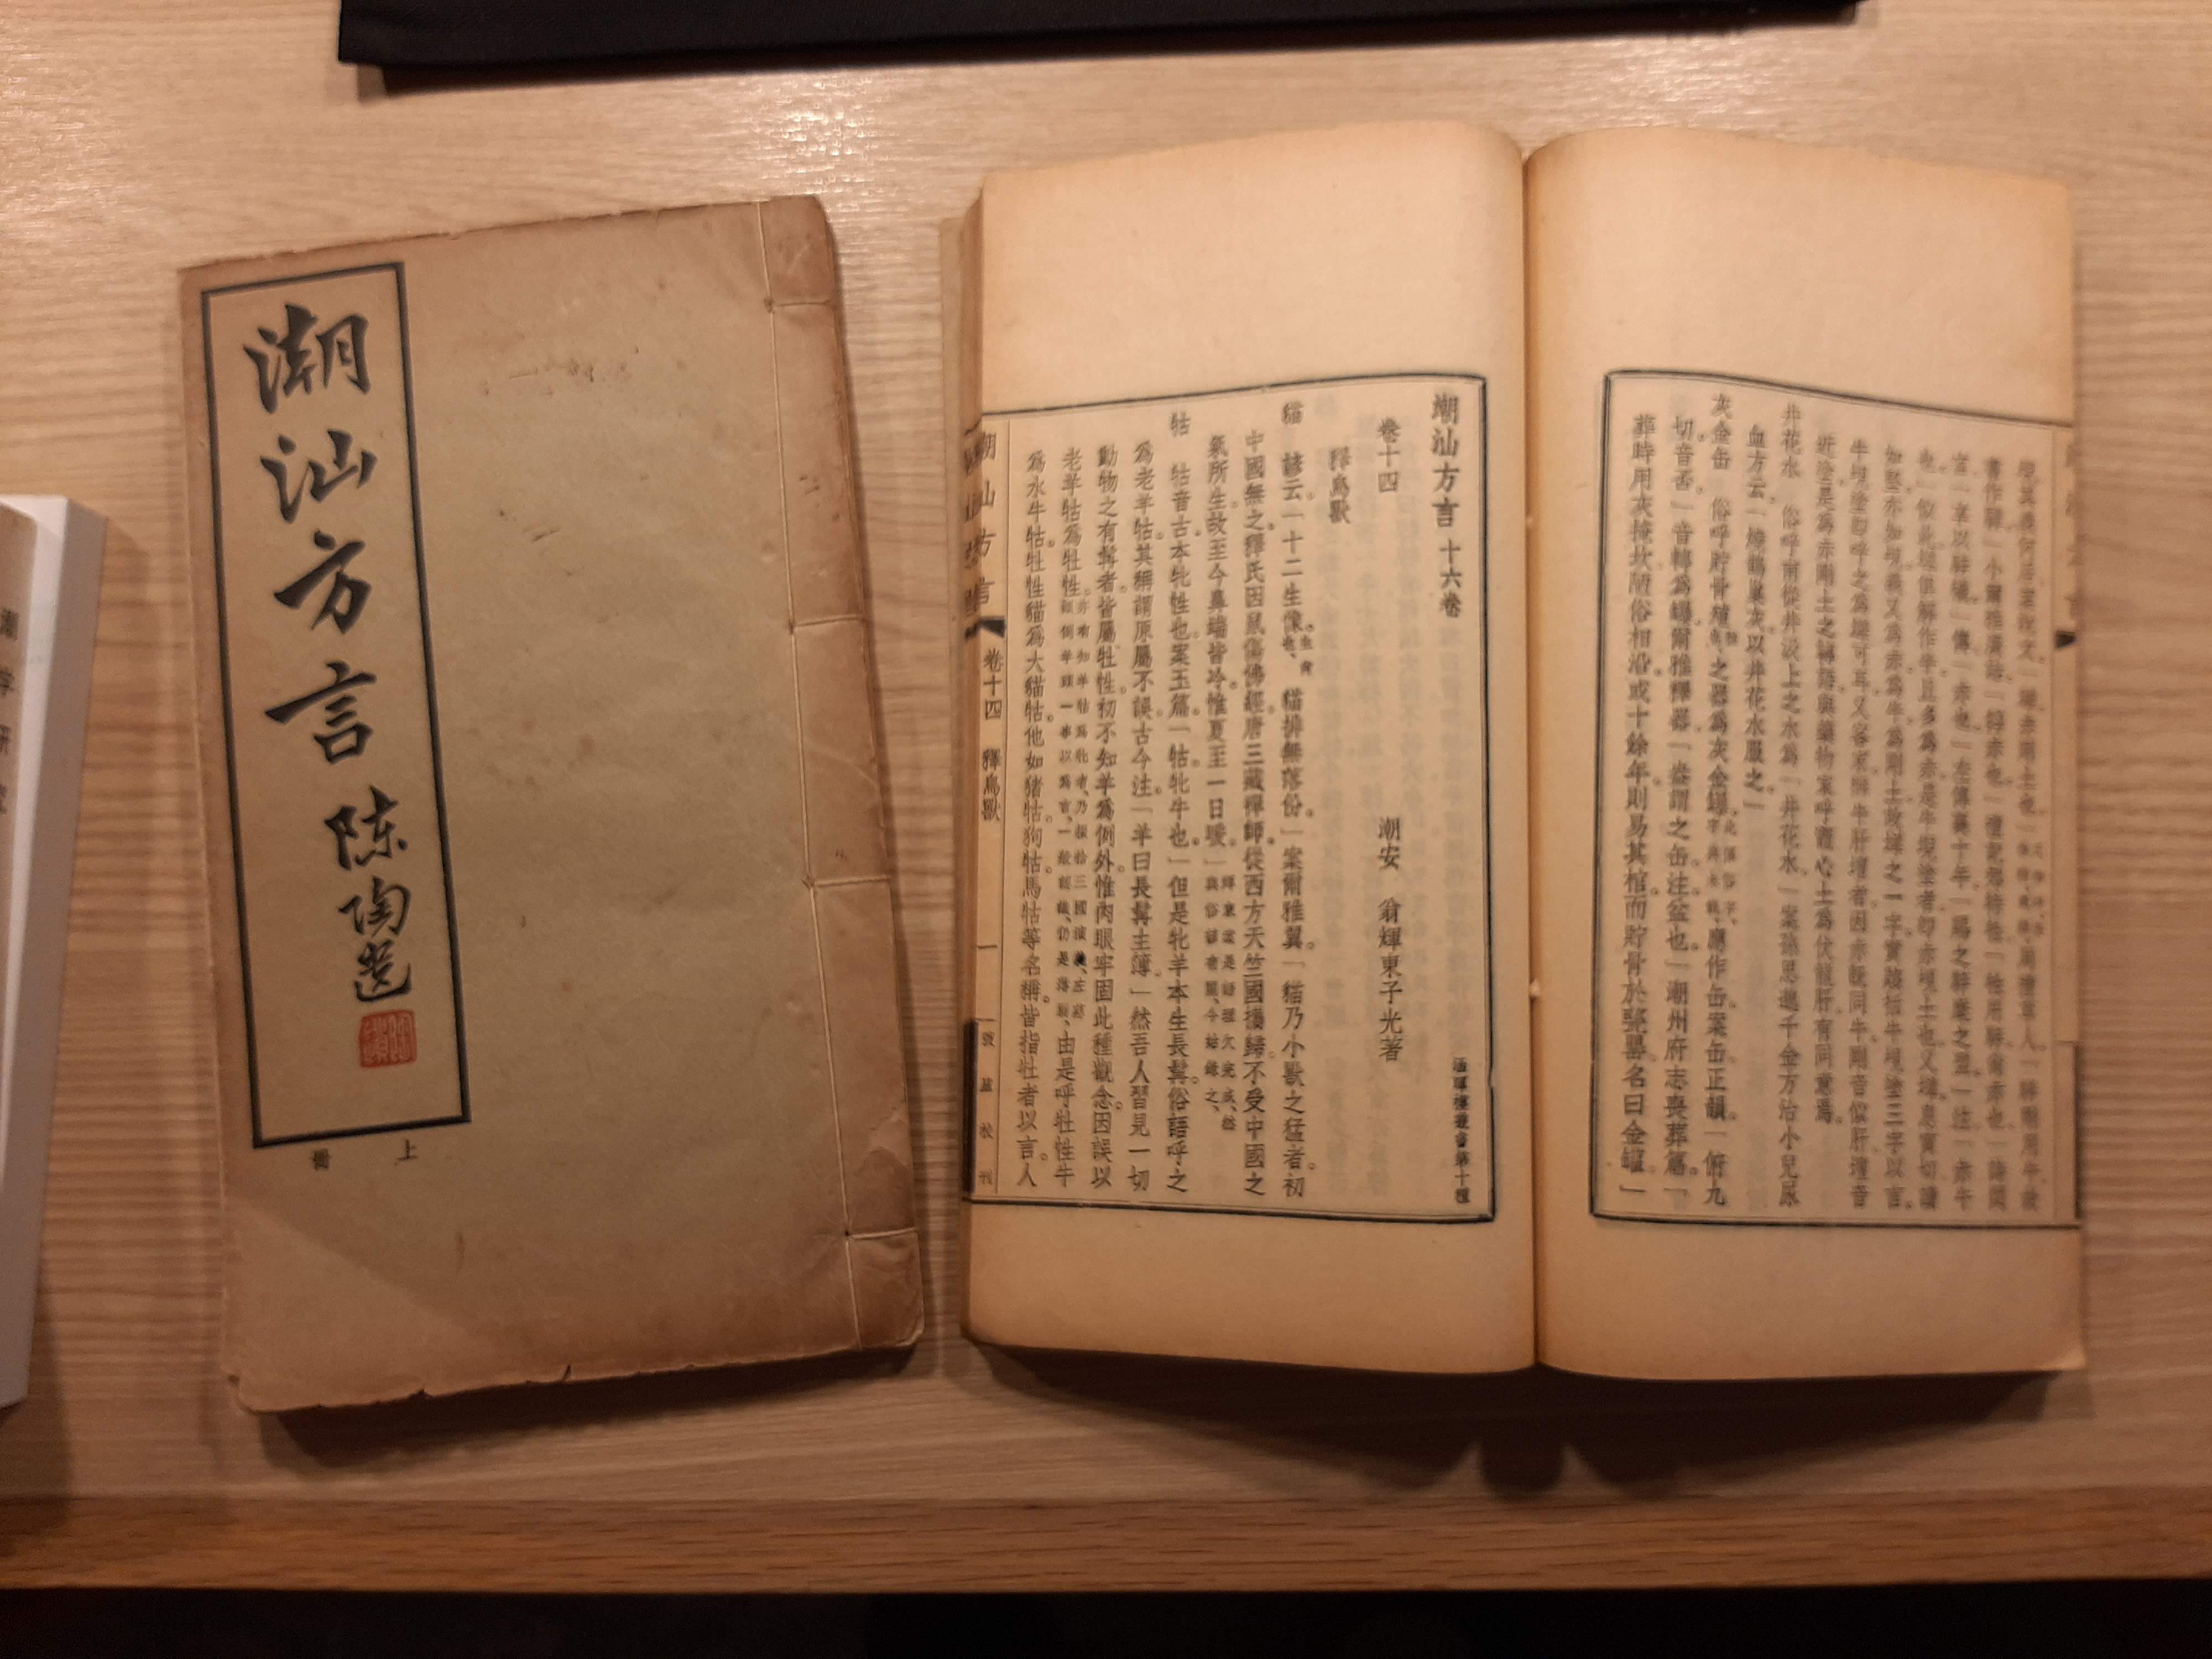 Thread-bound Teochew dictionary on table, one volume opened